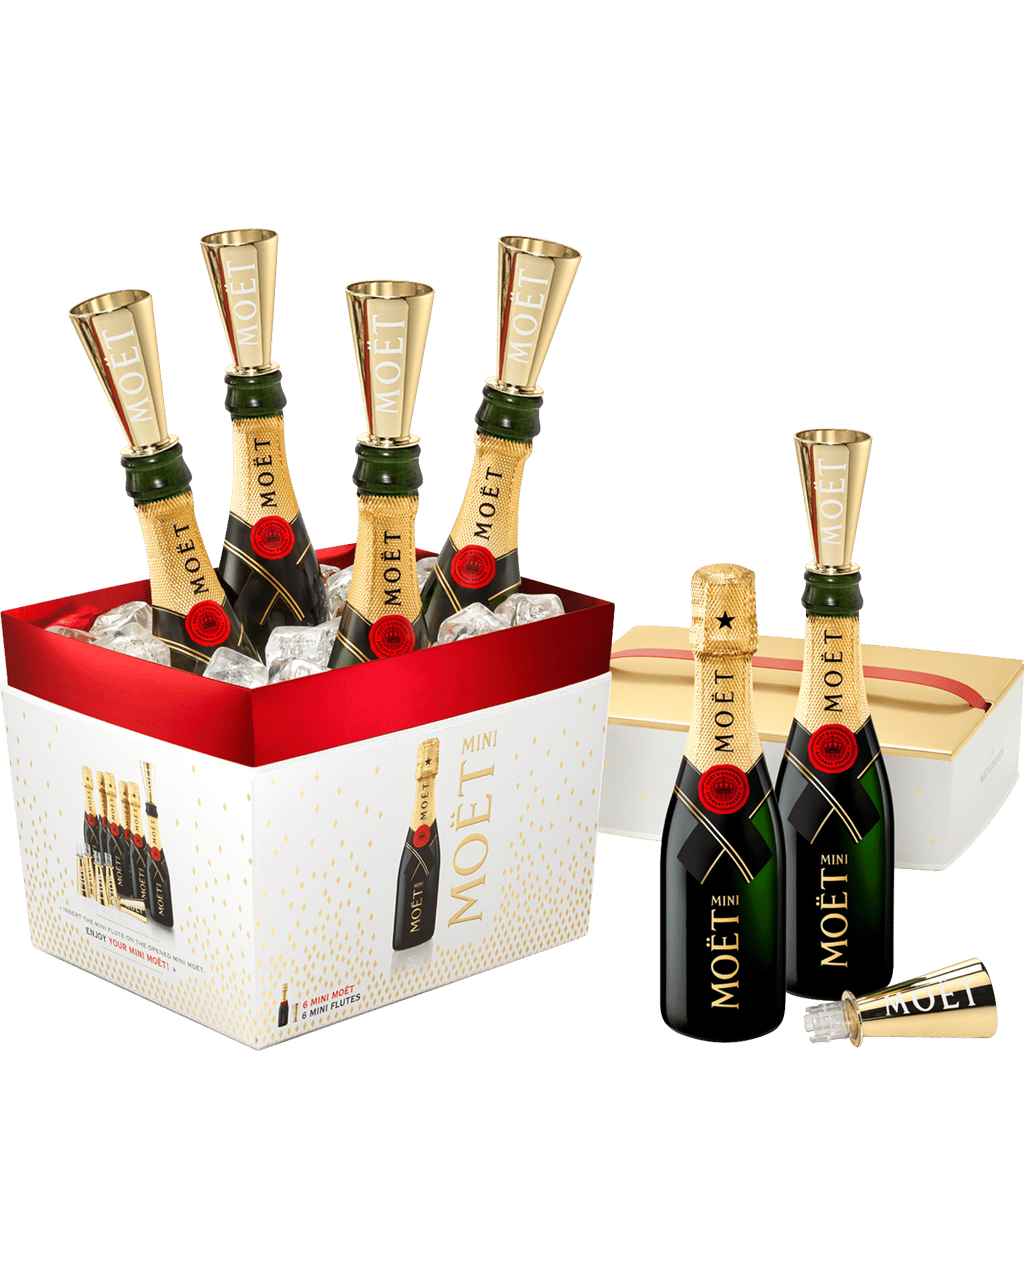 Moët & Chandon Brut Impérial Golden Sippers Mini Share Pack 6 X 200ml  (Unbeatable Prices): Buy Online @Best Deals with Delivery - Dan Murphy's